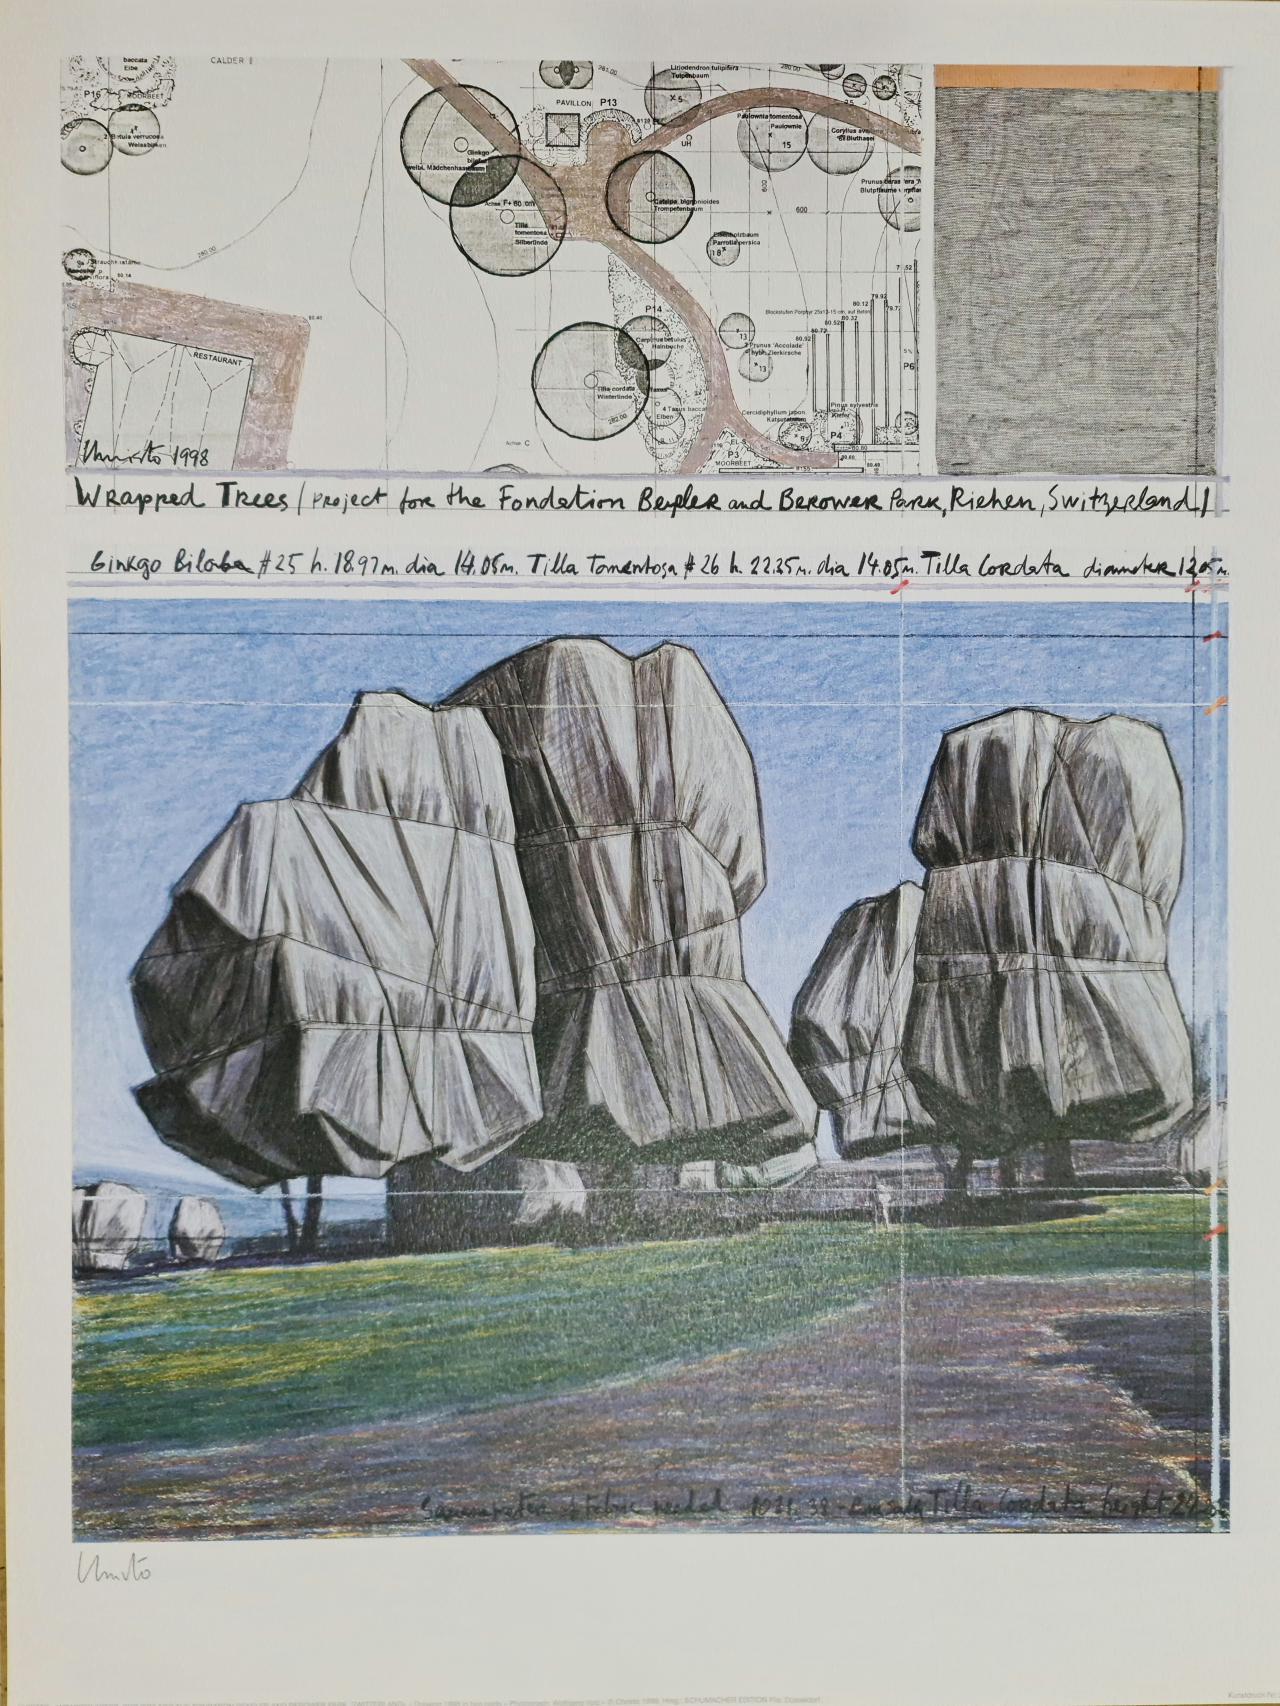 Christo and Jeanne-Claude Landscape Print - Christo, 'Wrapped Trees Vertical', Lithograph, 1998